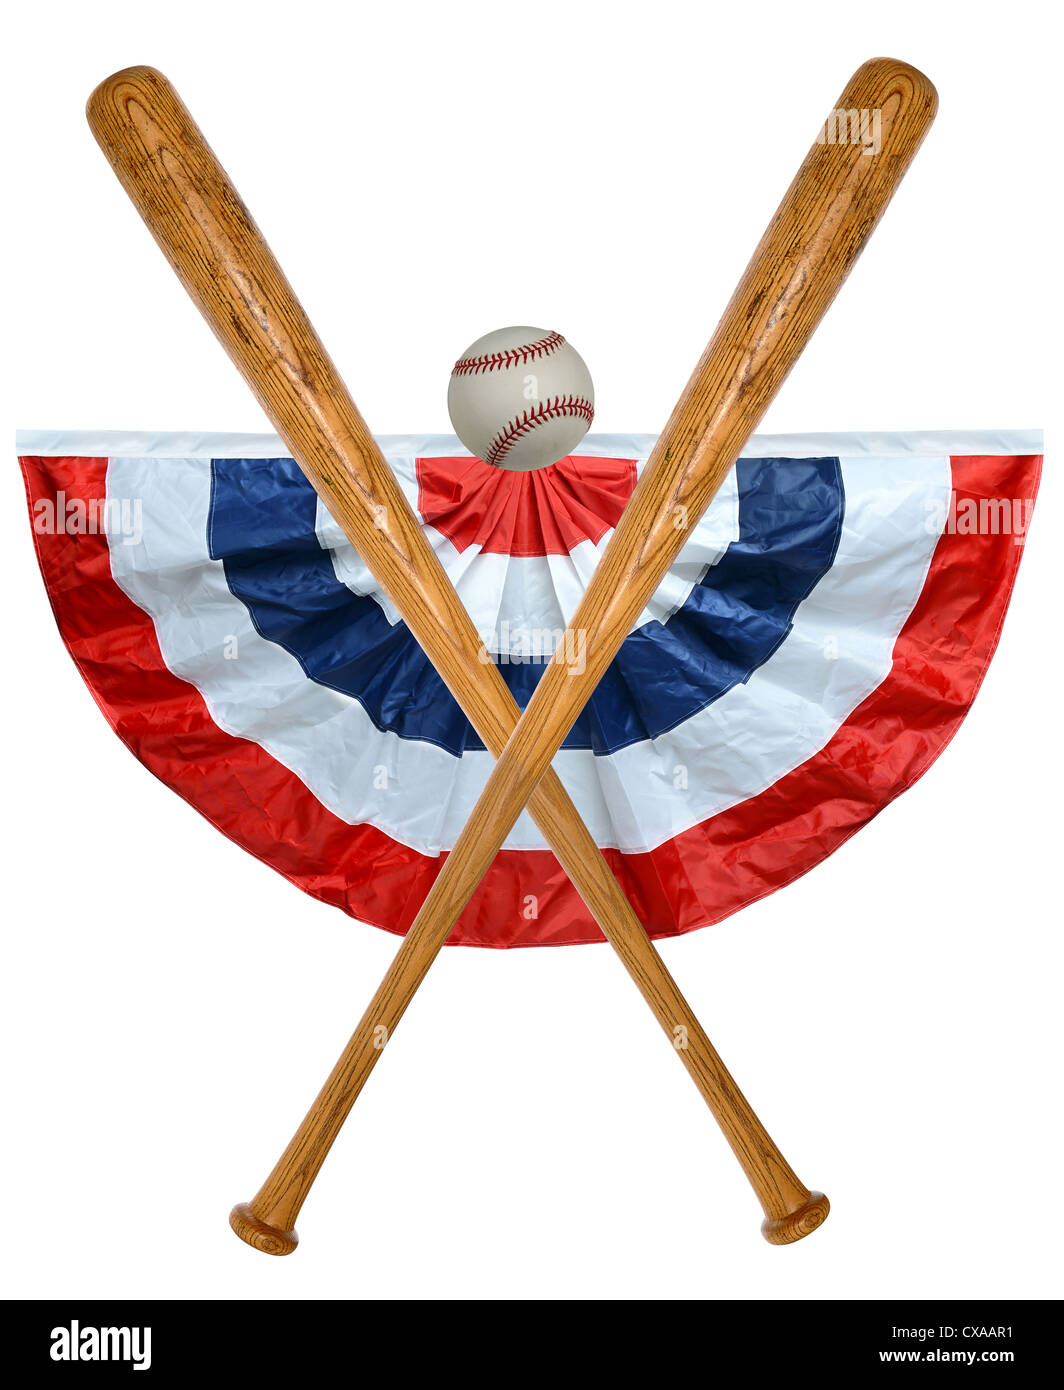 Baseball bats ball and banner isolated over white background Stock Photo